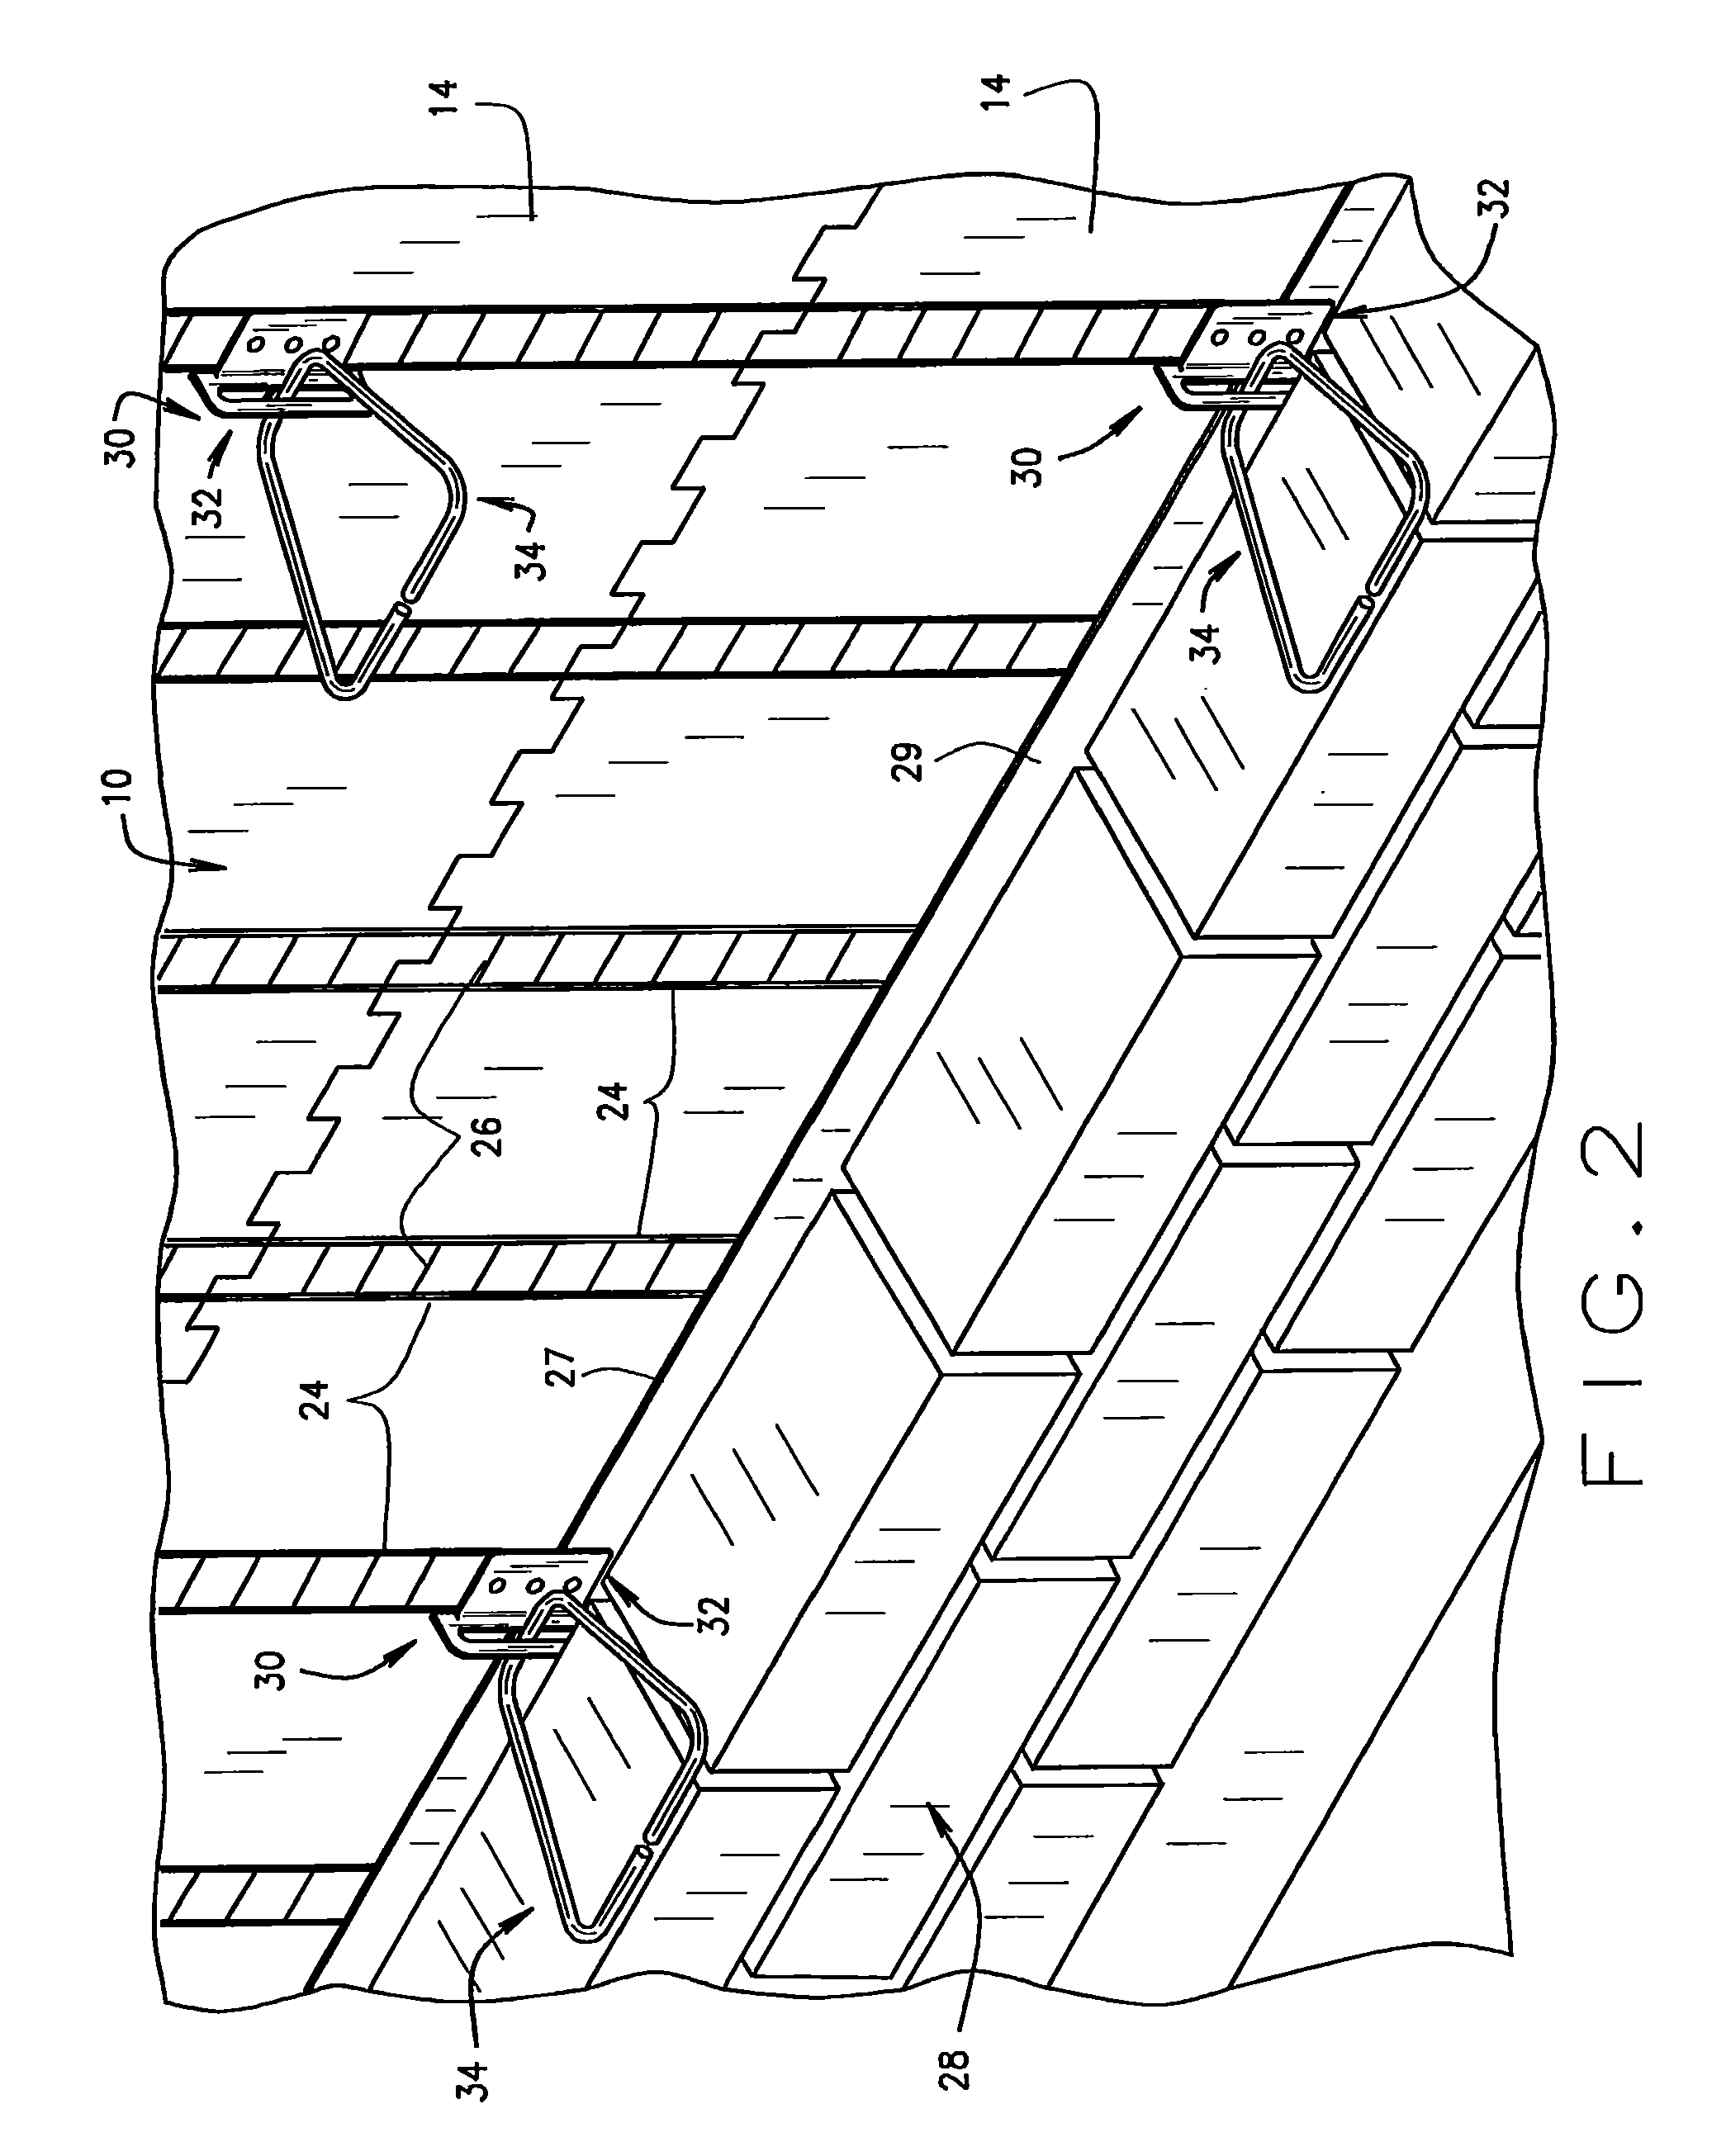 Adjustable masonry anchor assembly for use with insulating concrete form systems